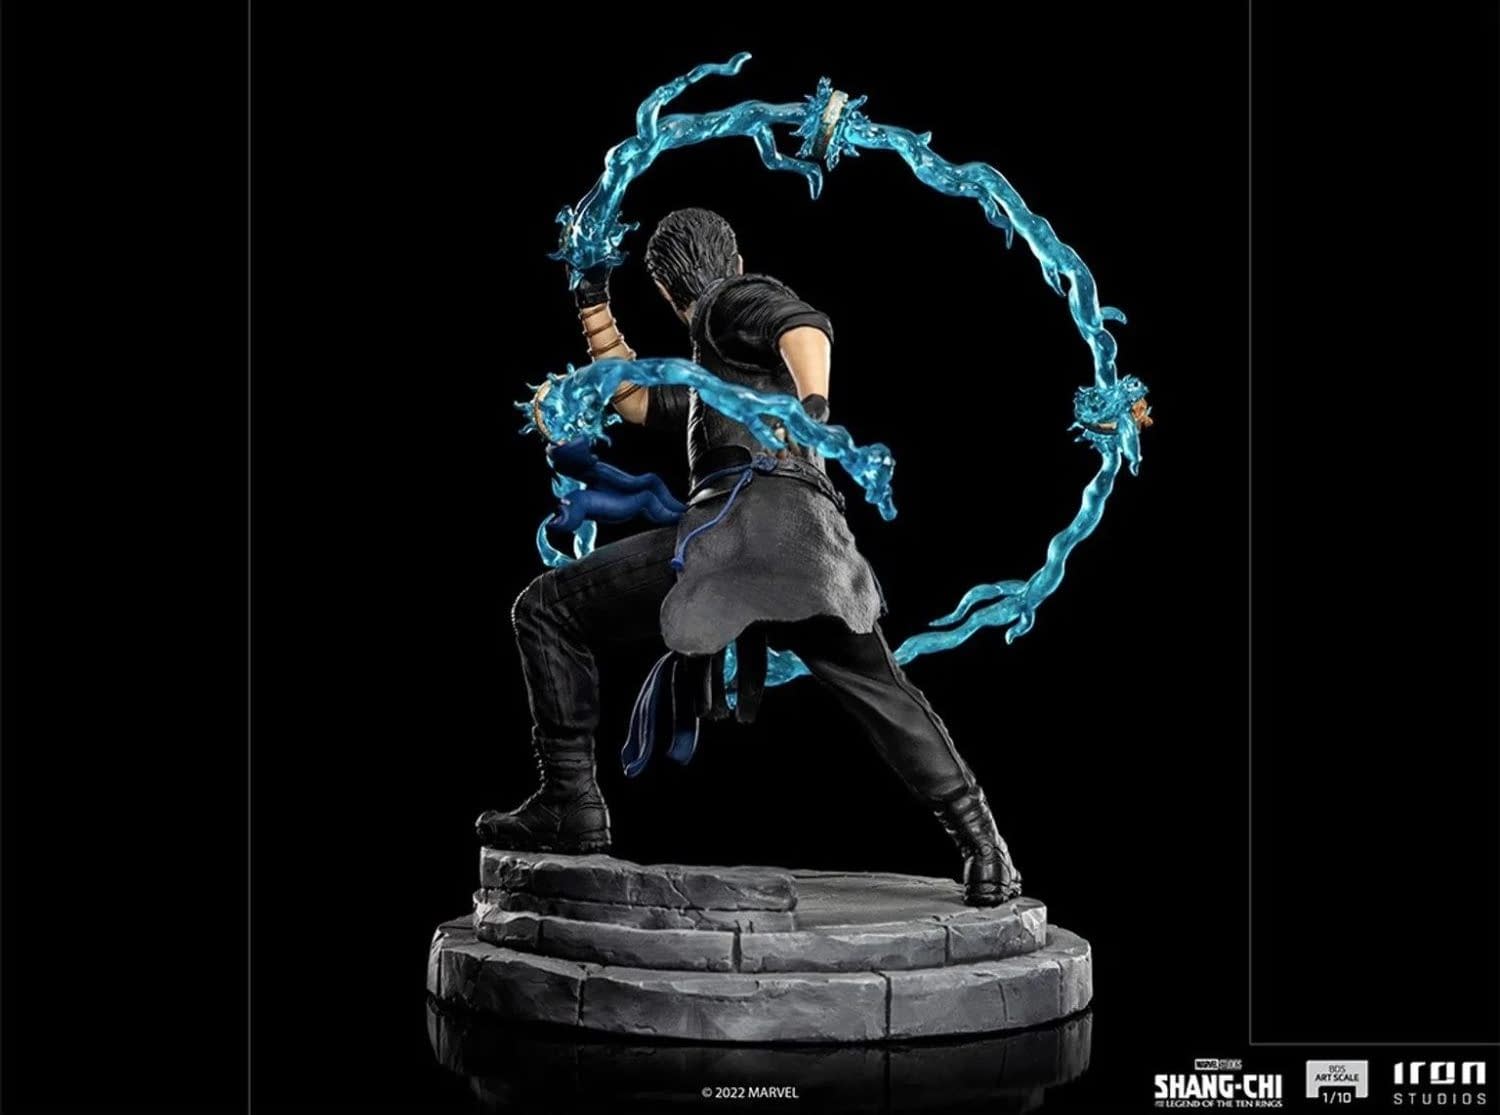 Iron Studios Debuts Their Next MCU Shang-Chi Statue with Wenwu